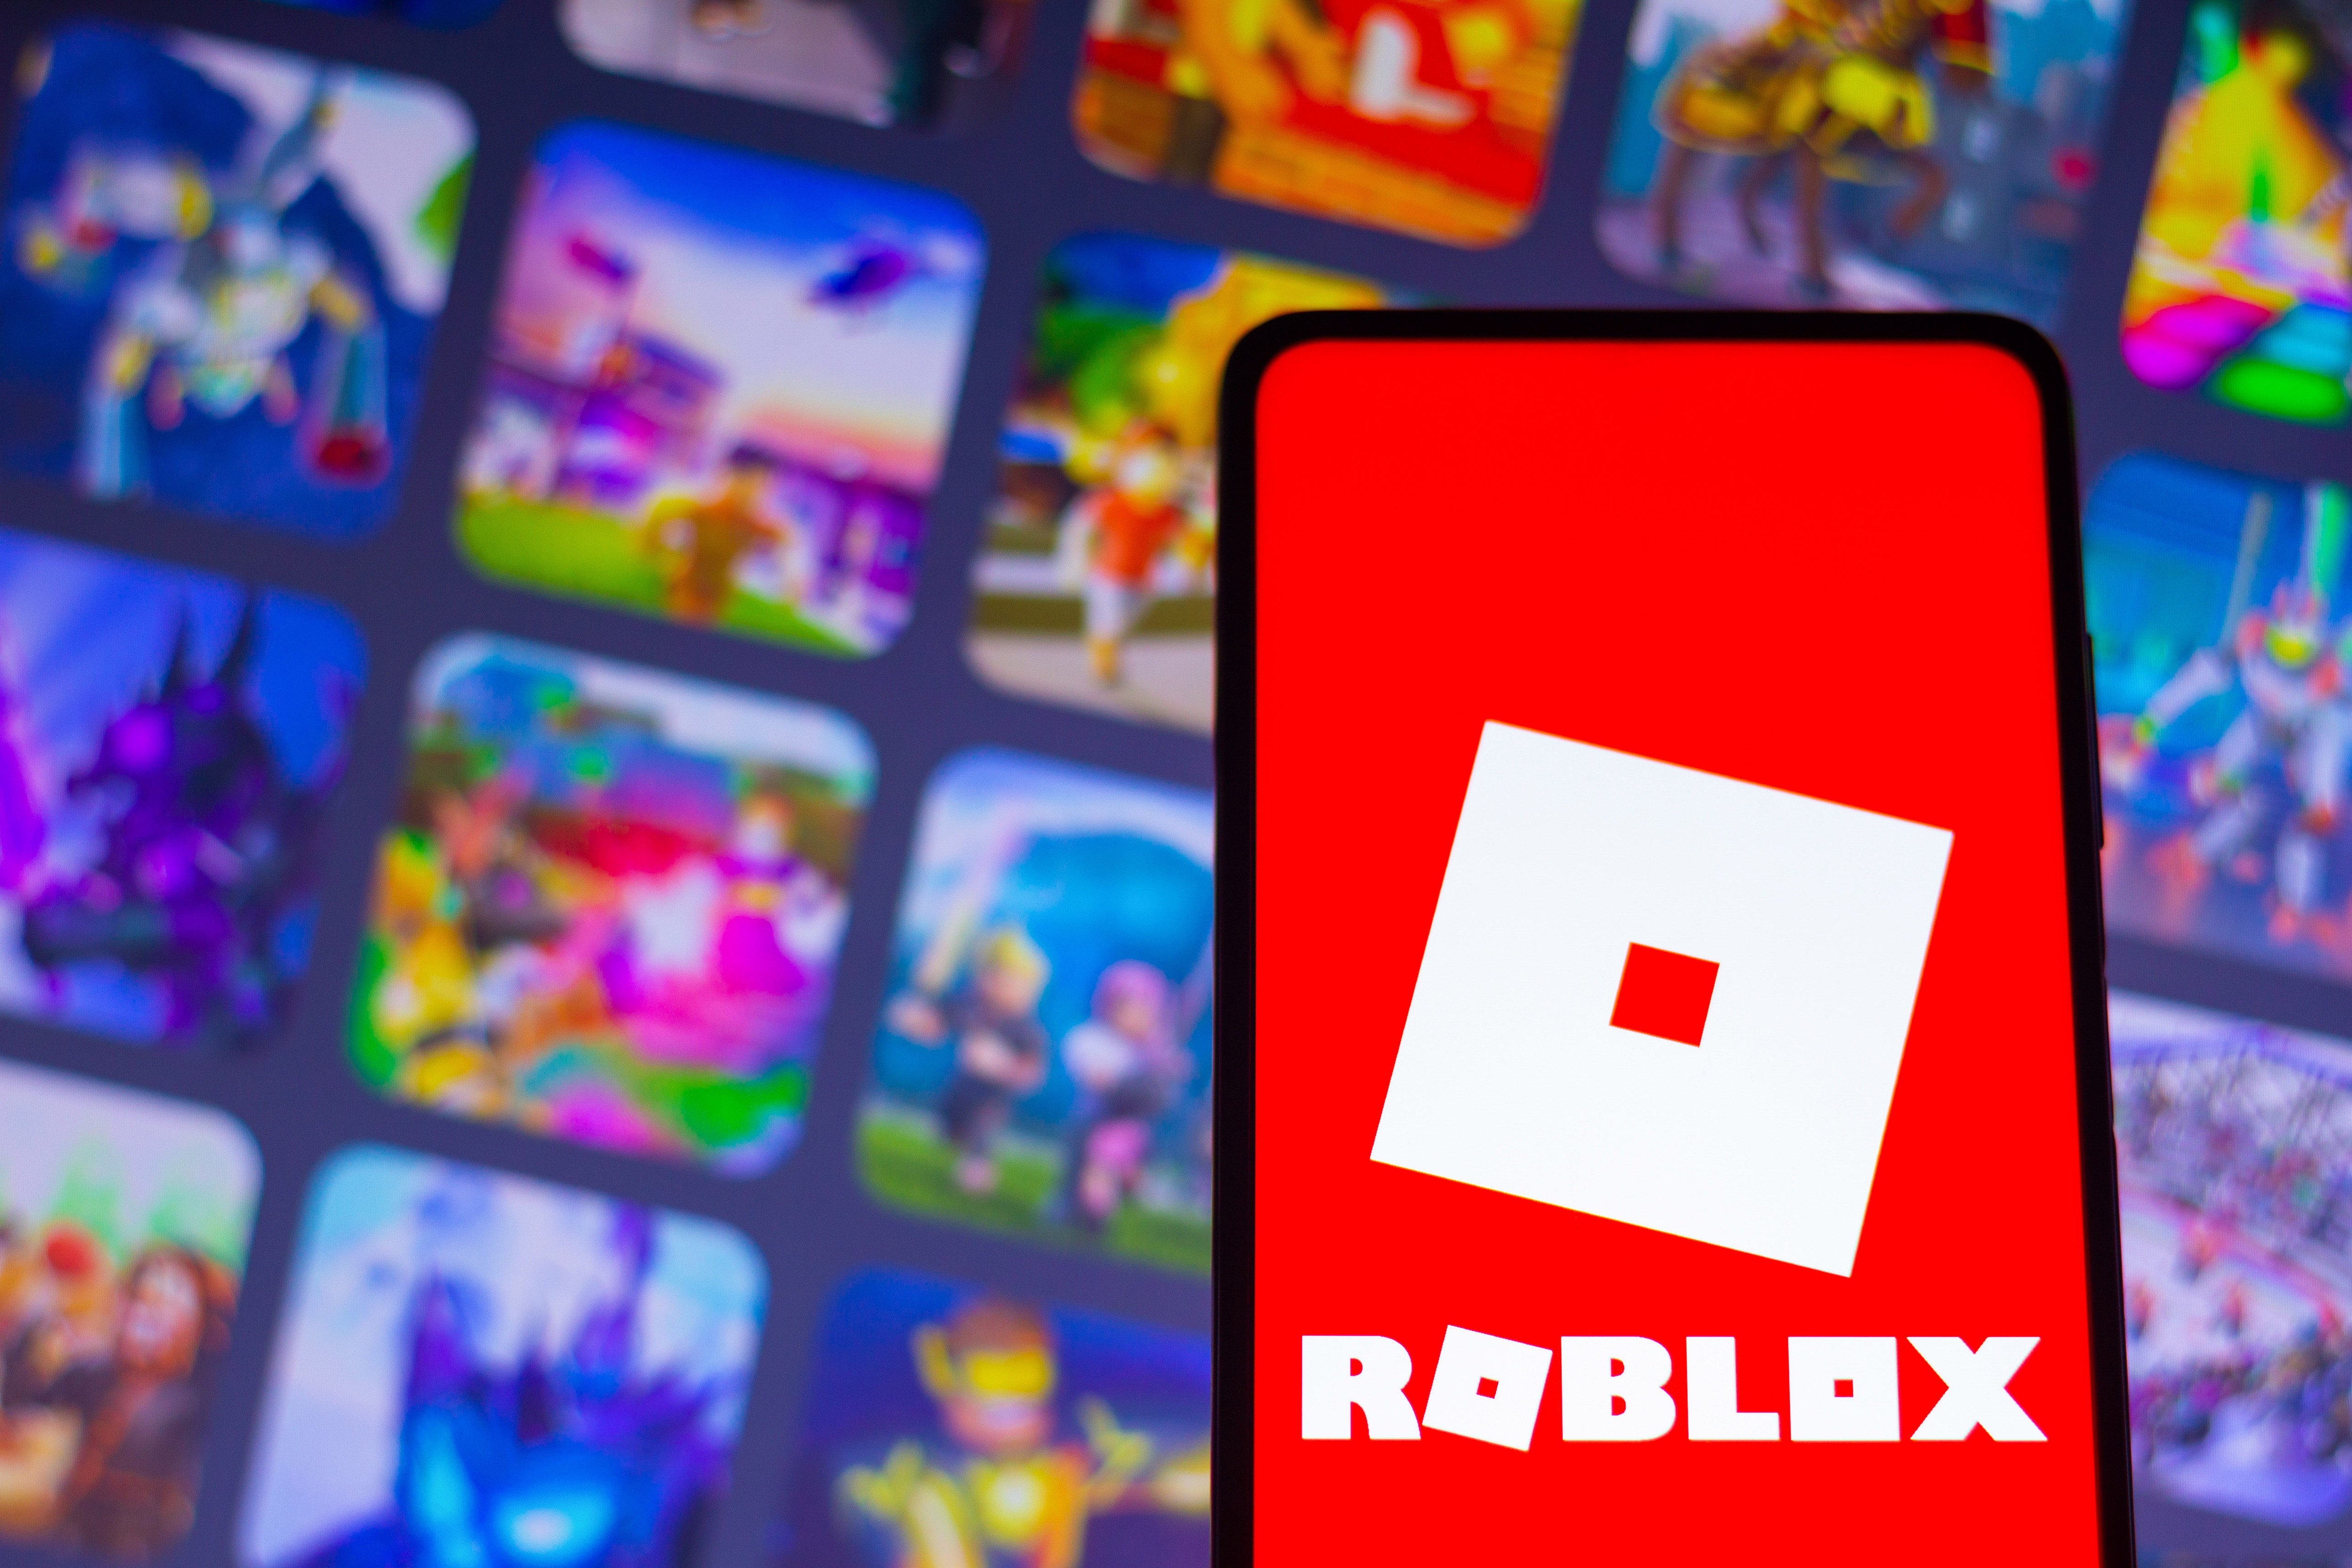 Leaked Roblox documents detail Chinese censorship concessions